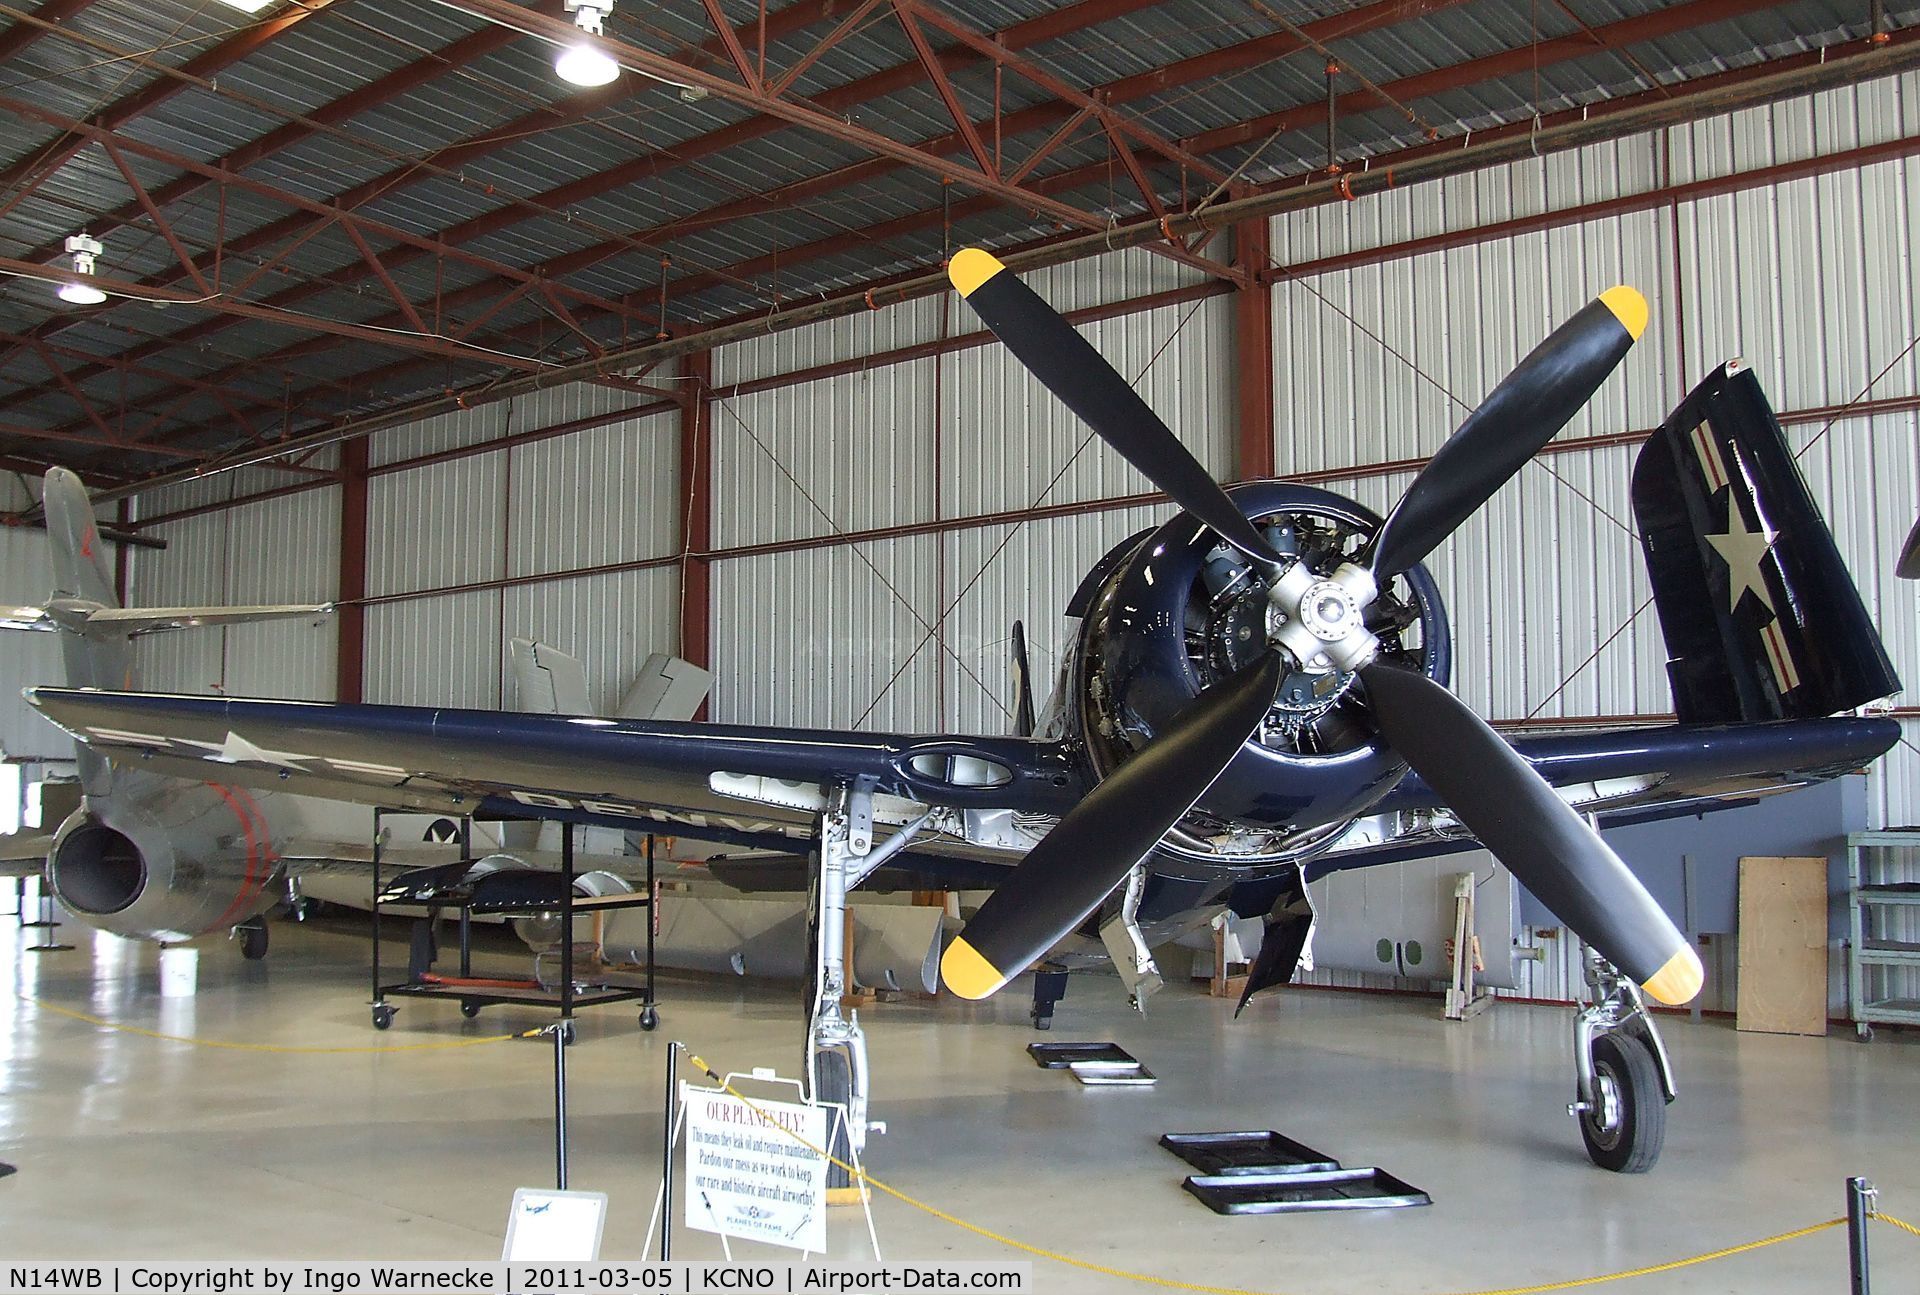 N14WB, Grumman F8F-2 (G58) Bearcat C/N D.1148, Grumman F8F-2 Bearcat at the Planes of Fame Air Museum, Chino CA